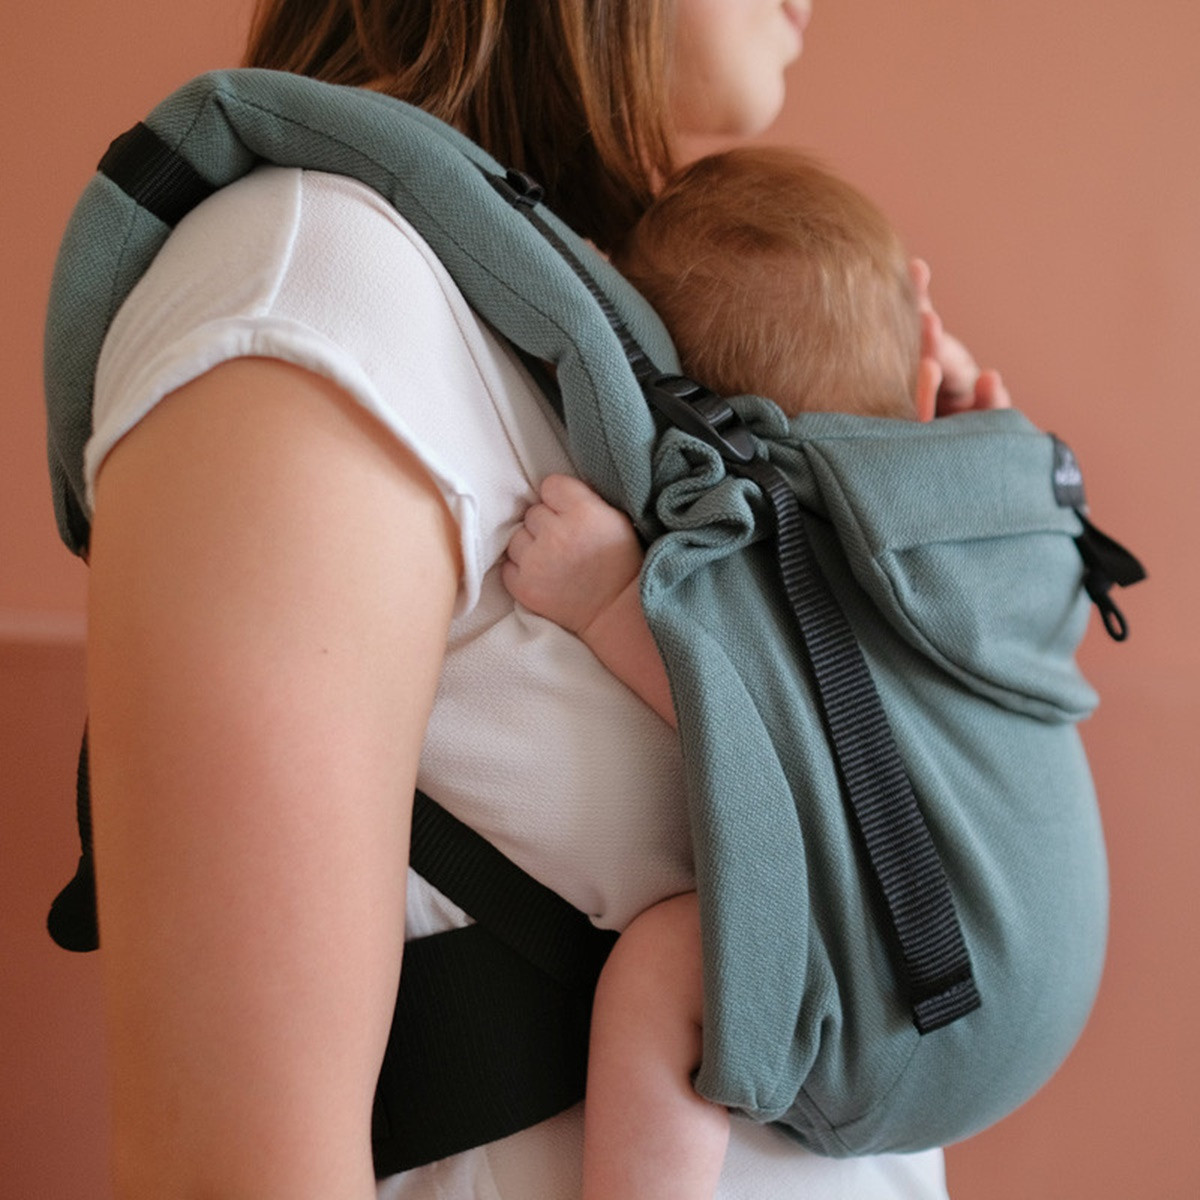 Neobulle Woven Wrap - physiological babywearing suitable for Newborns